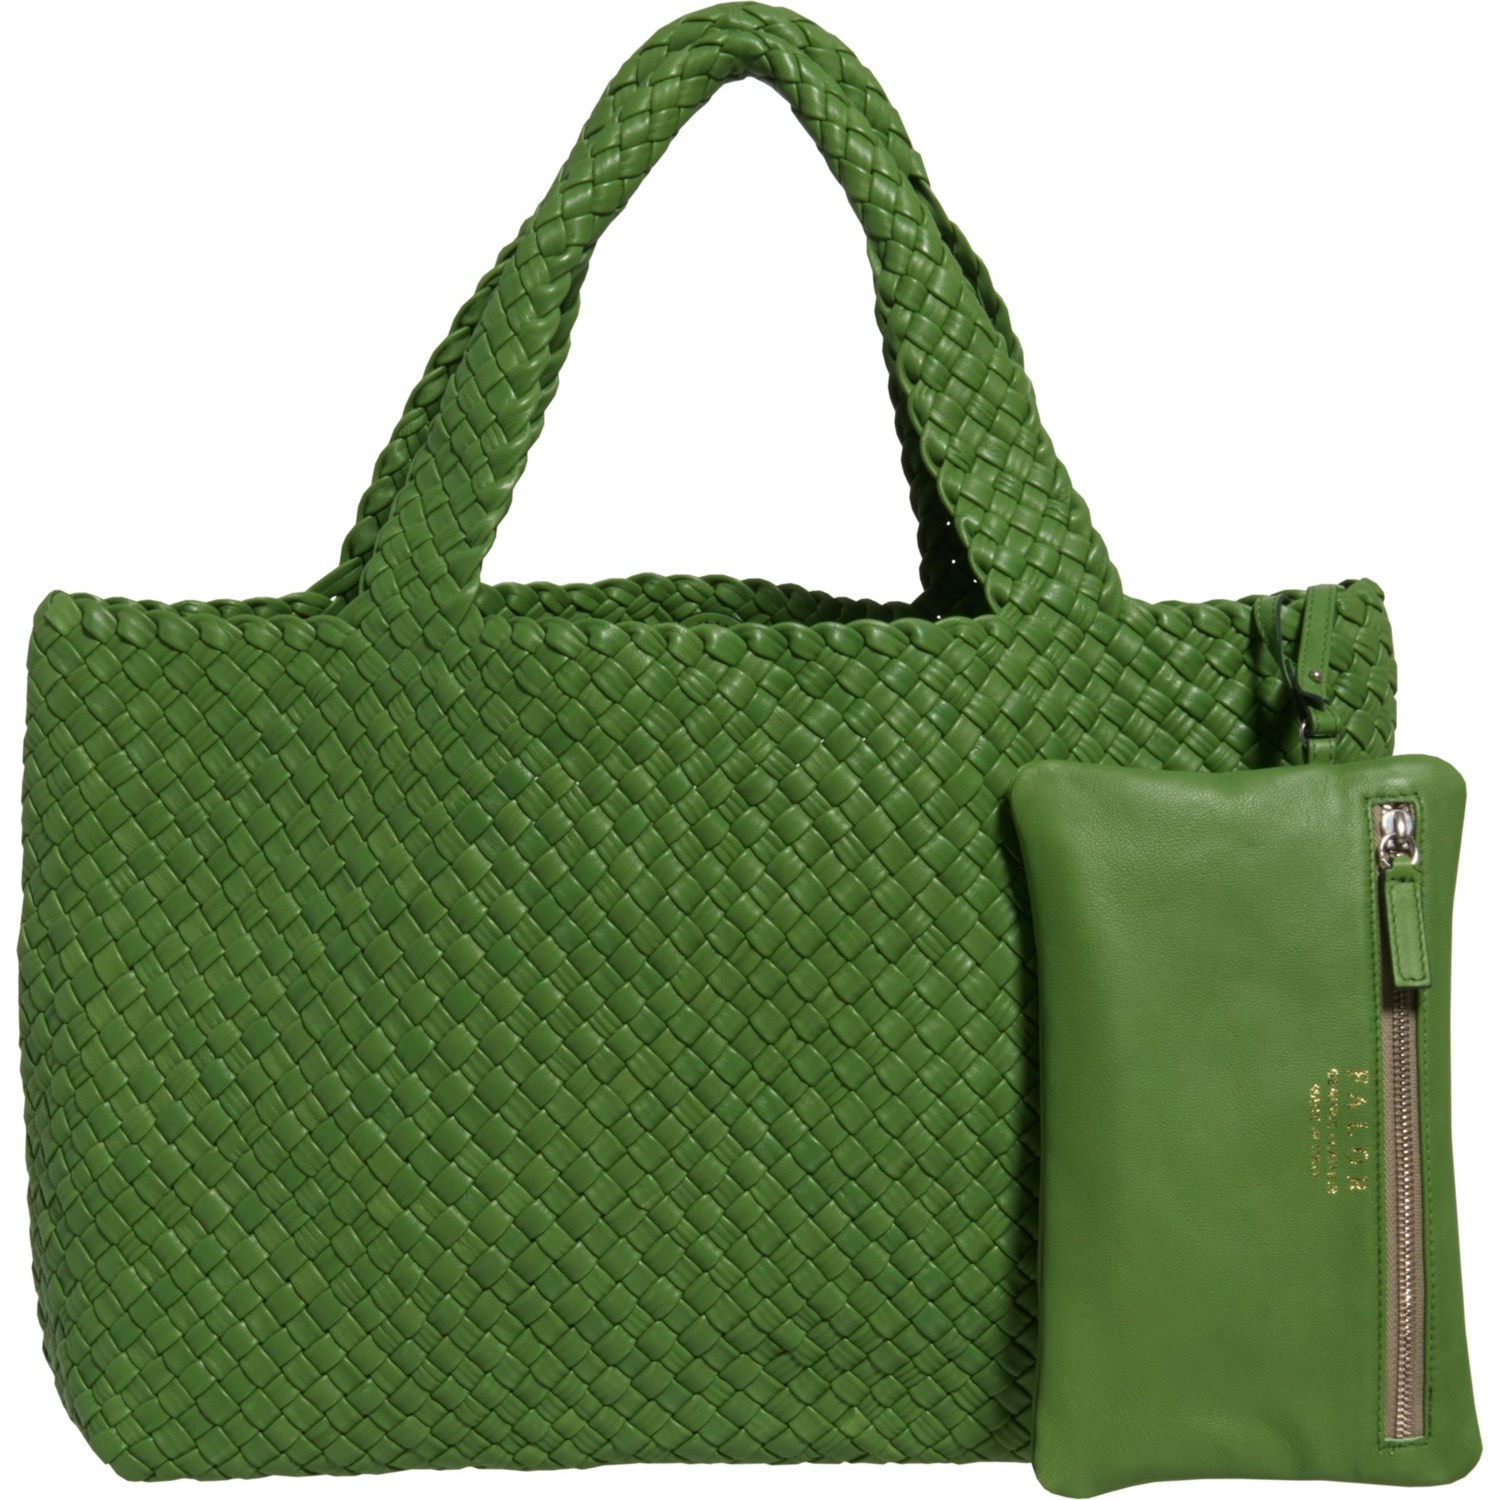 FALOR Made in Italy Woven Tote Bag (For Women) - Save 41%